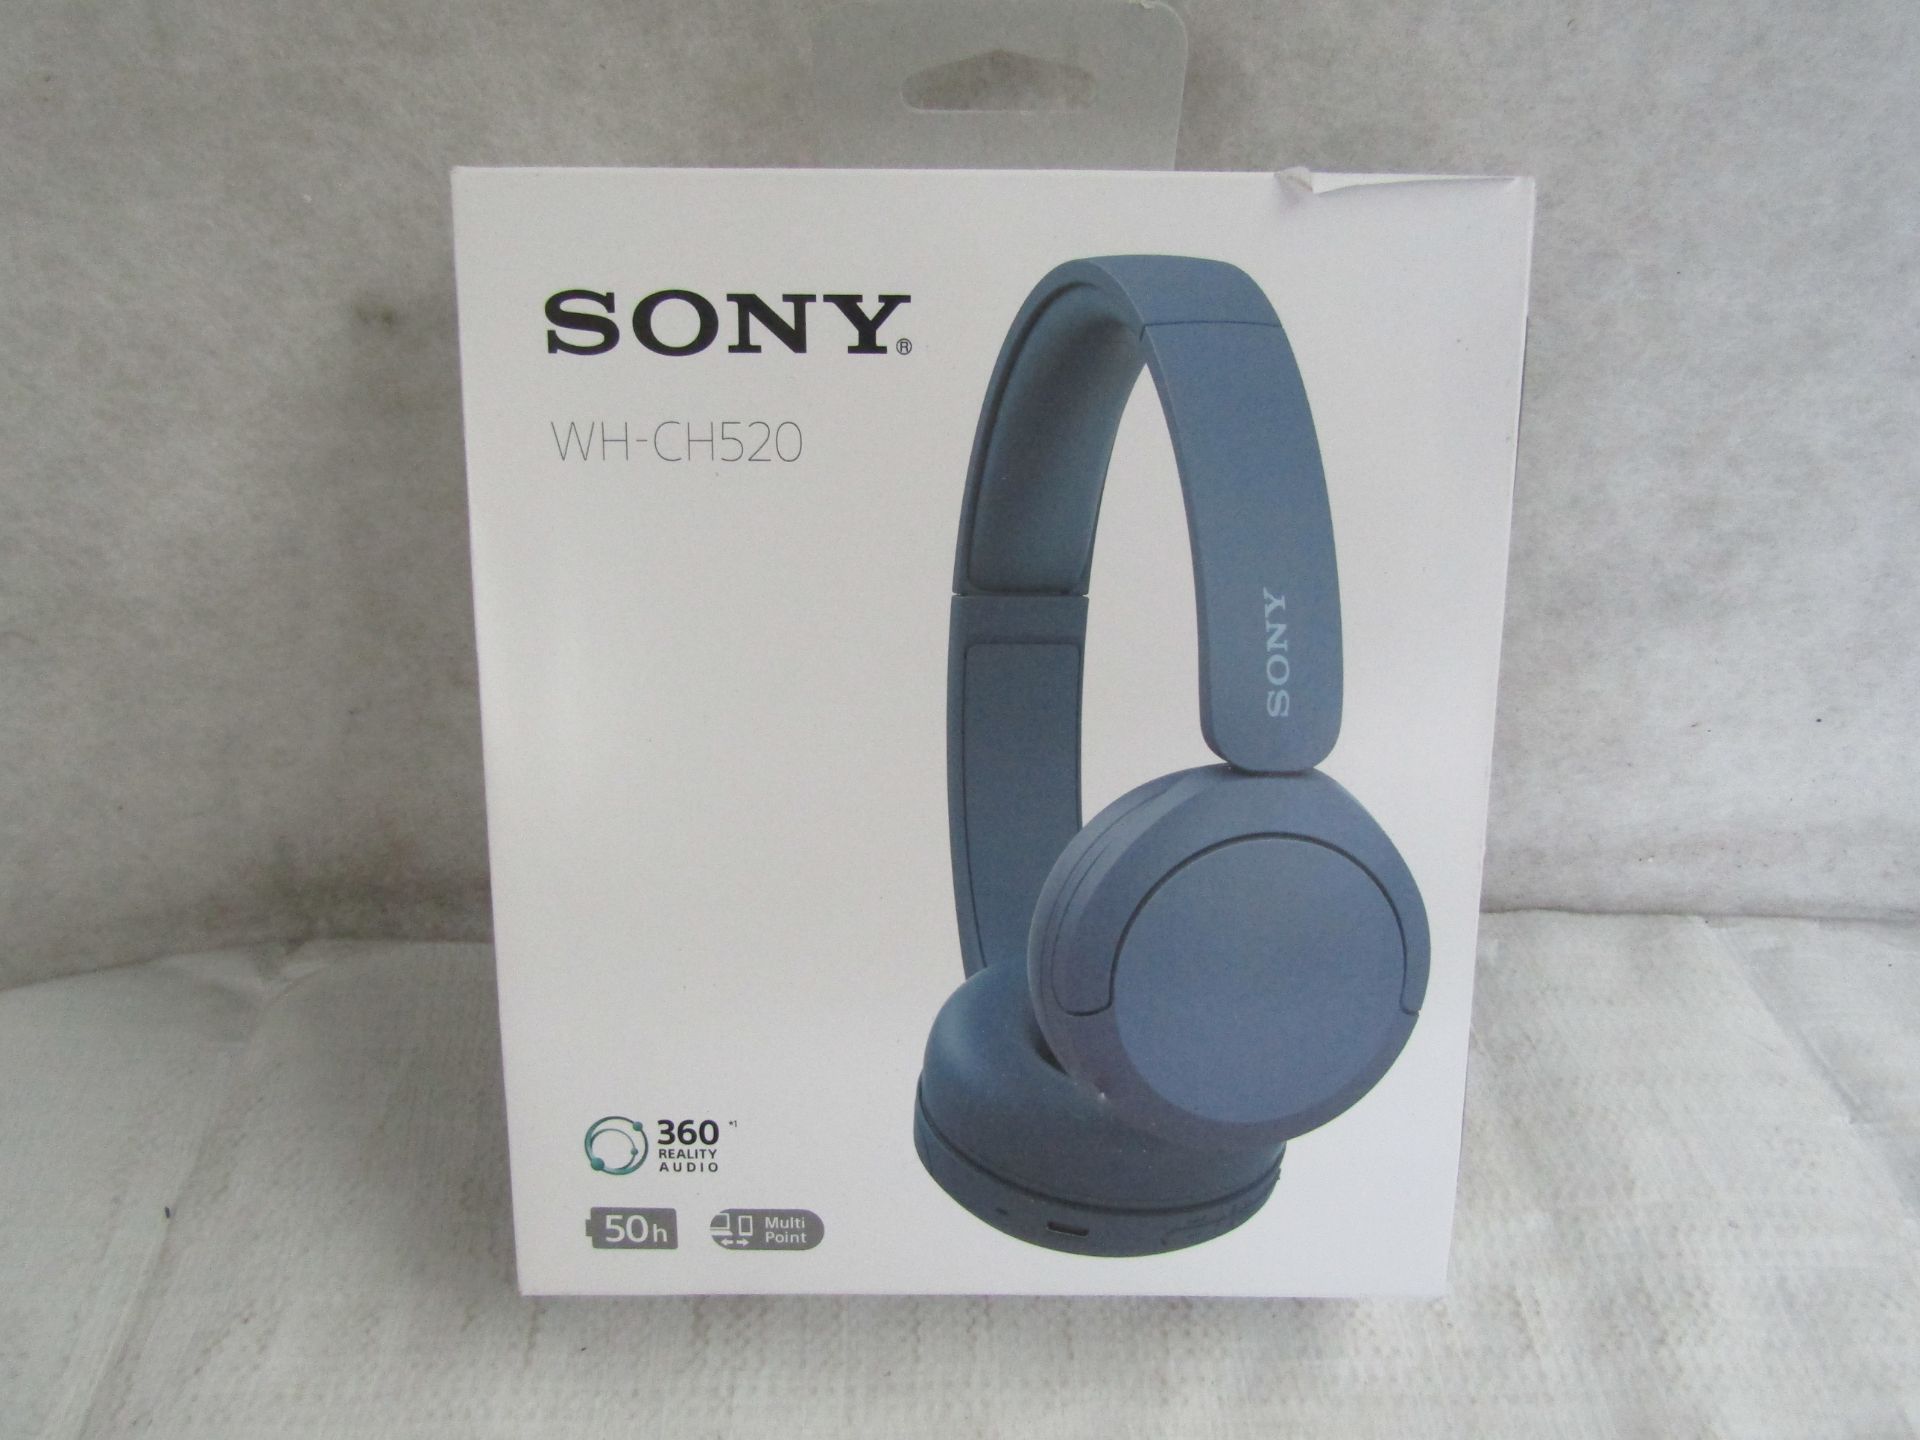 Sony WH-CH520 Wireless Bluetooth Headphones - up to 50 Hours Battery Life with Quick Charge, On-